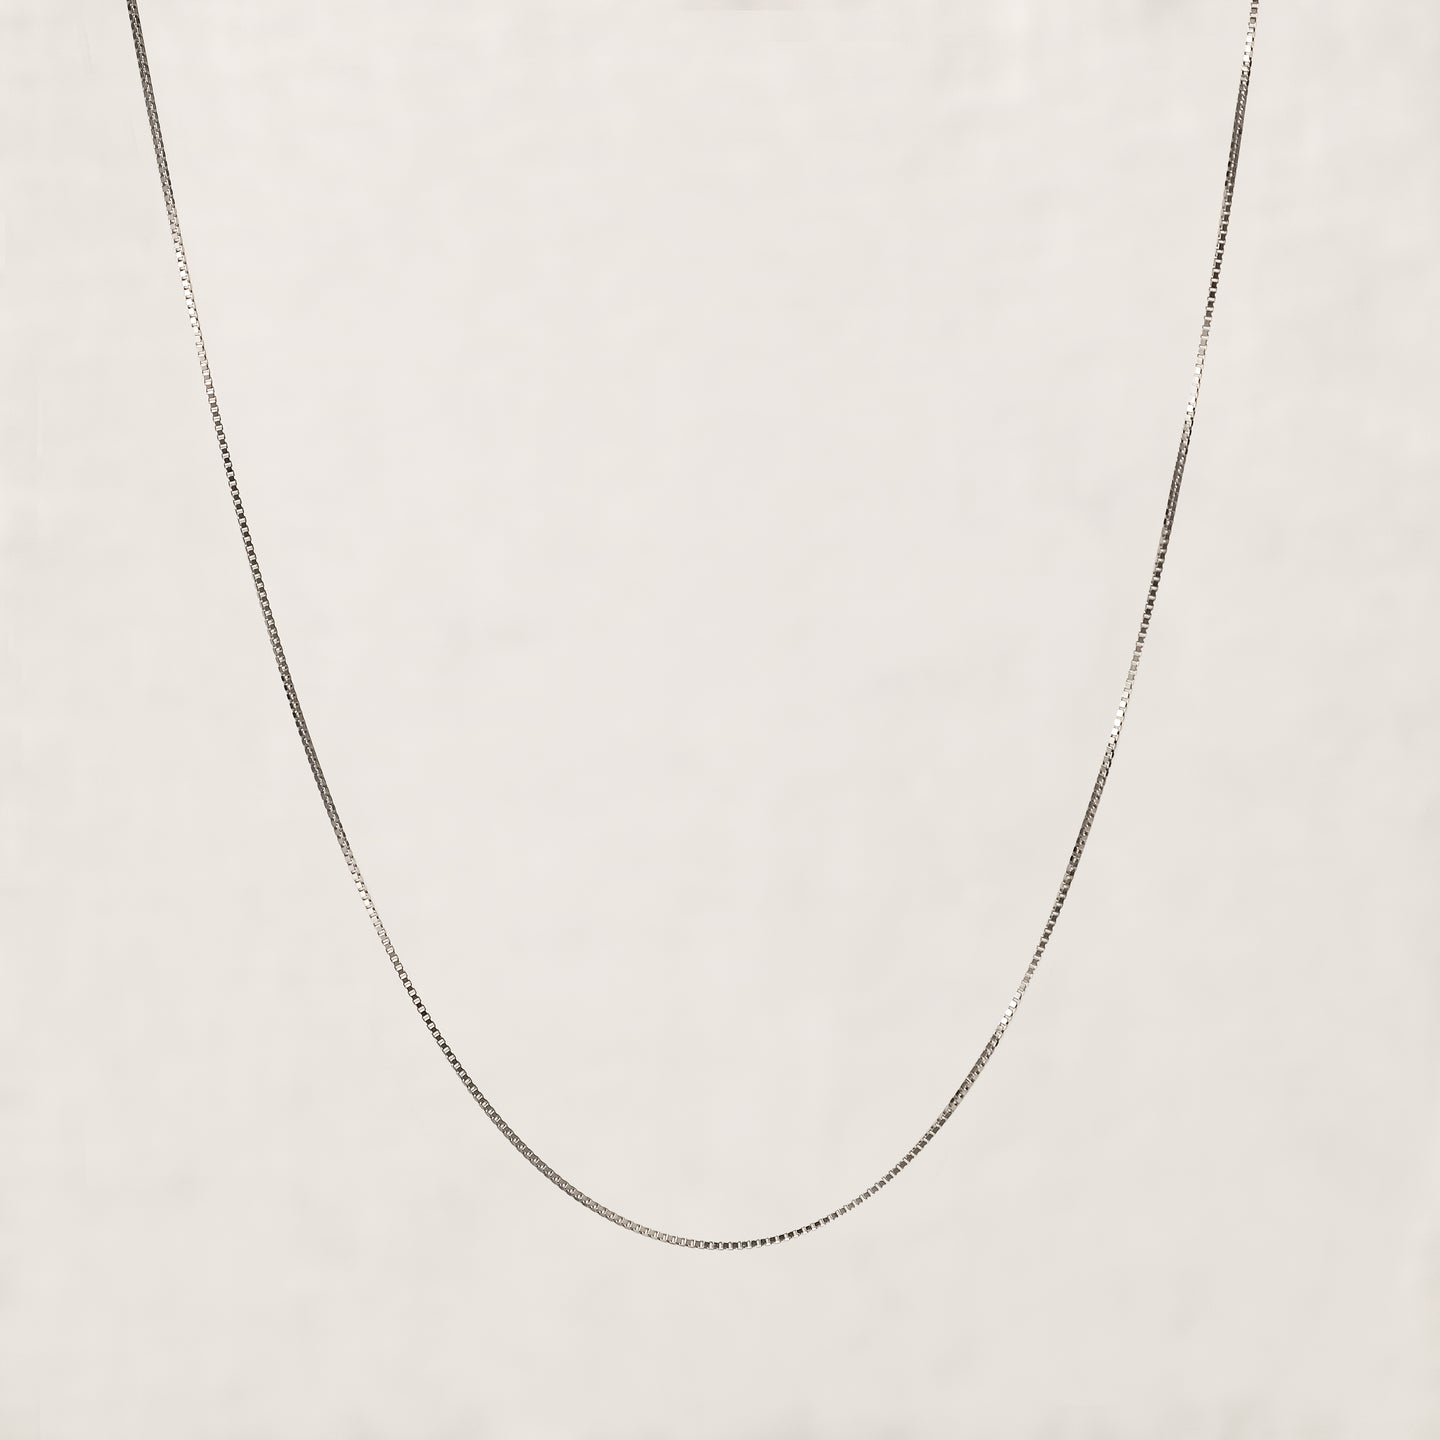 files/ruca-necklace-925-sterling-silver-2.jpg